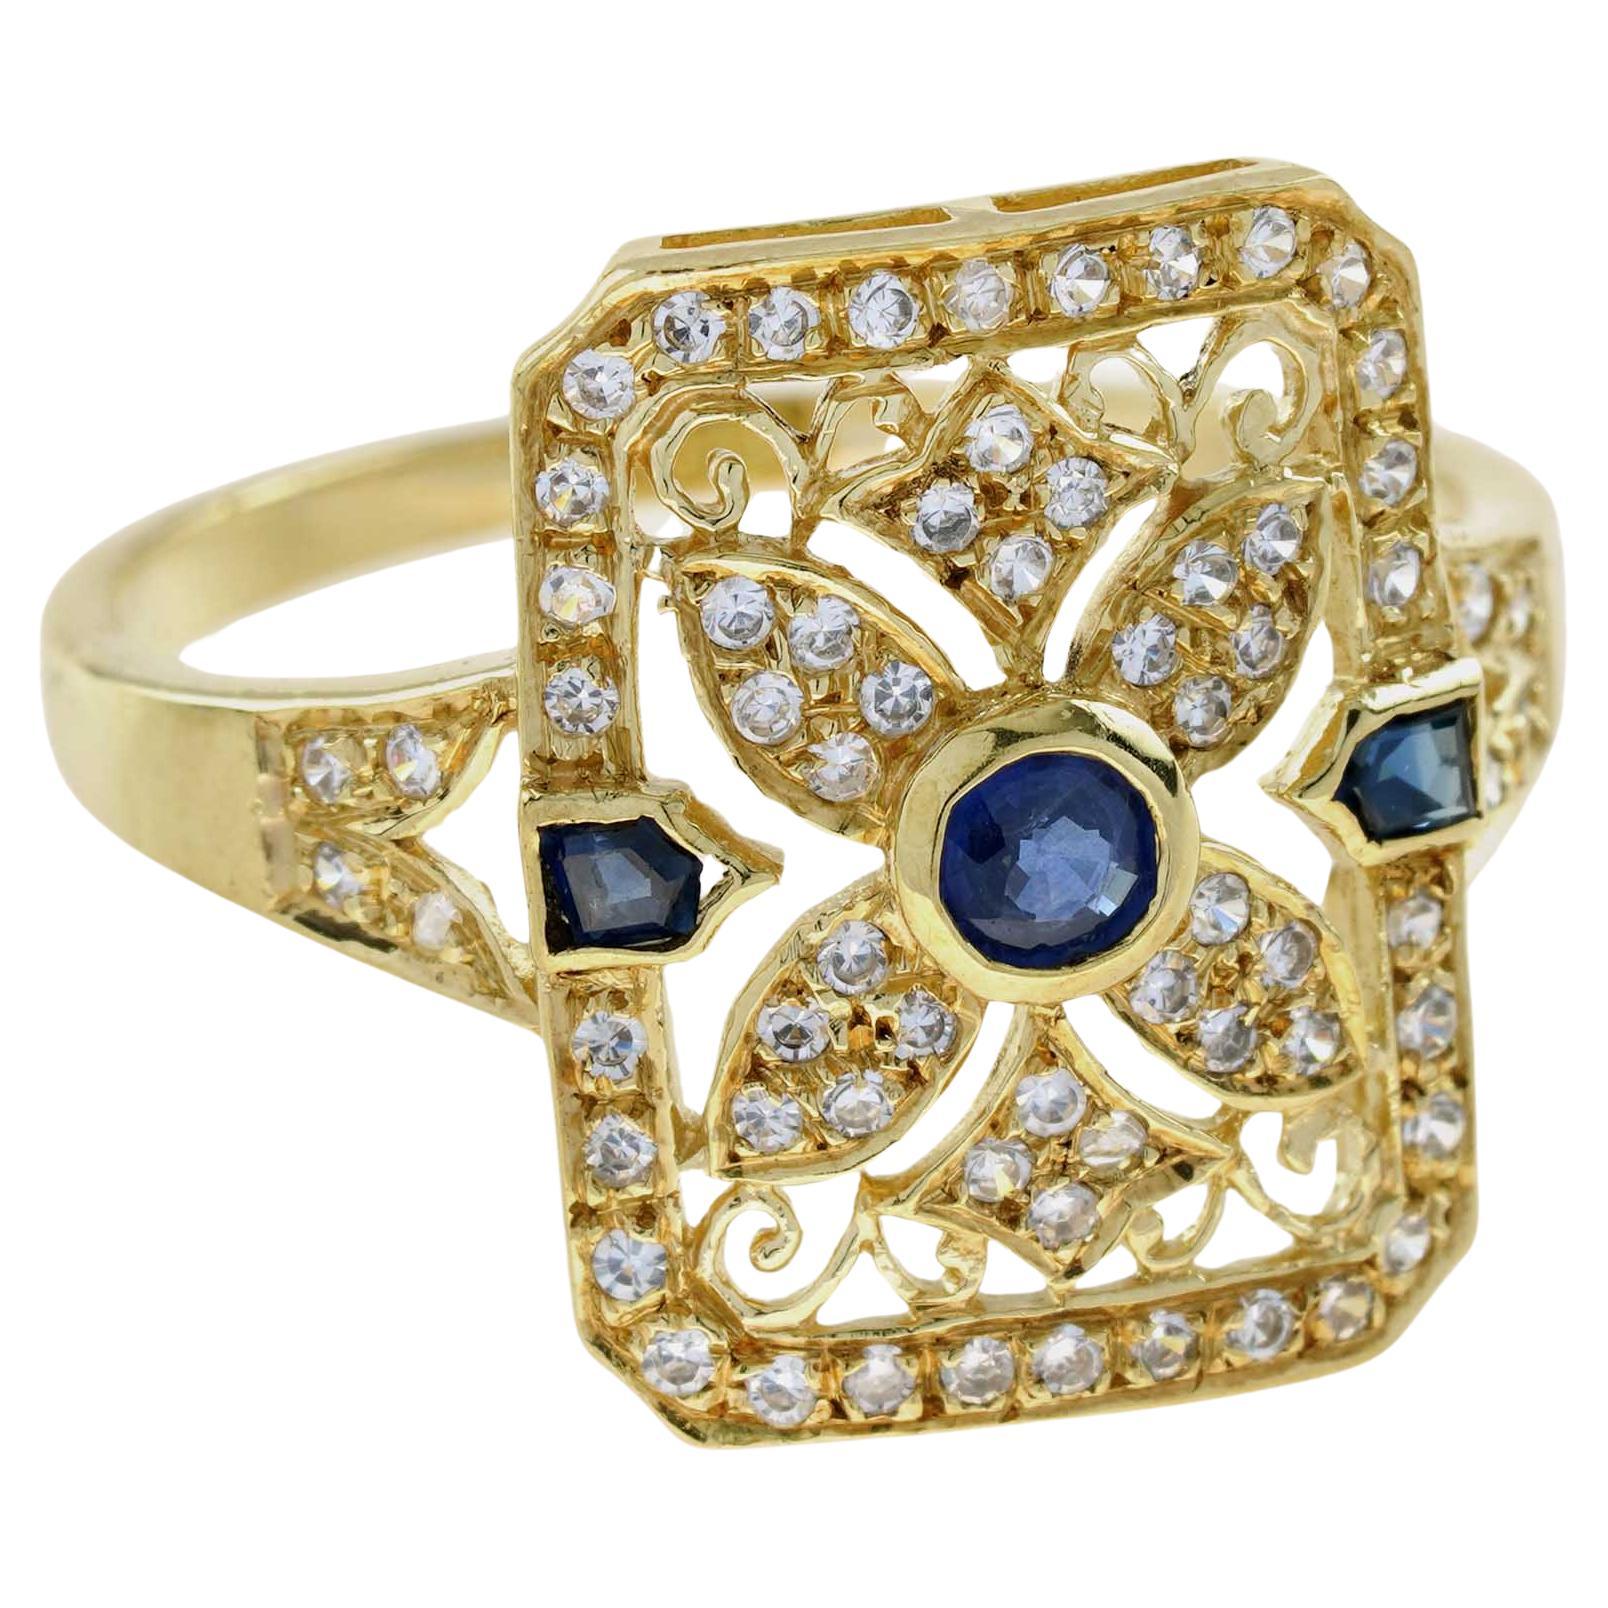 For Sale:  Natural Sapphire and Diamond Octagon Filigree Ring in Solid 9K Yellow Gold